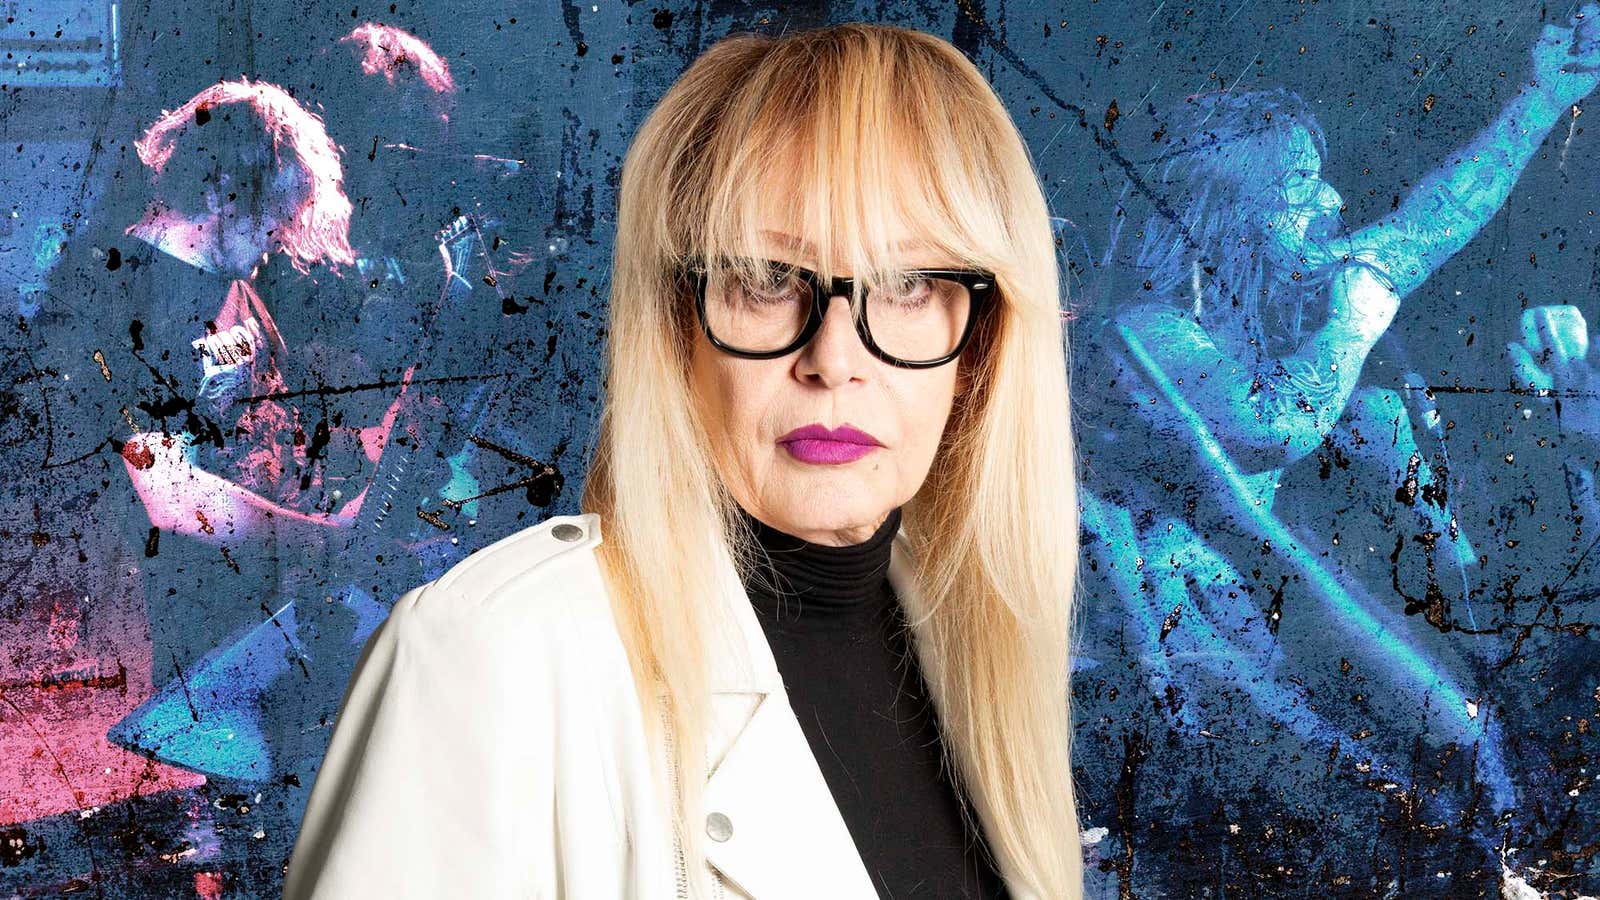 <i>Wayne’s World</i> director Penelope Spheeris on leaving Hollywood behind: “They can blow me”